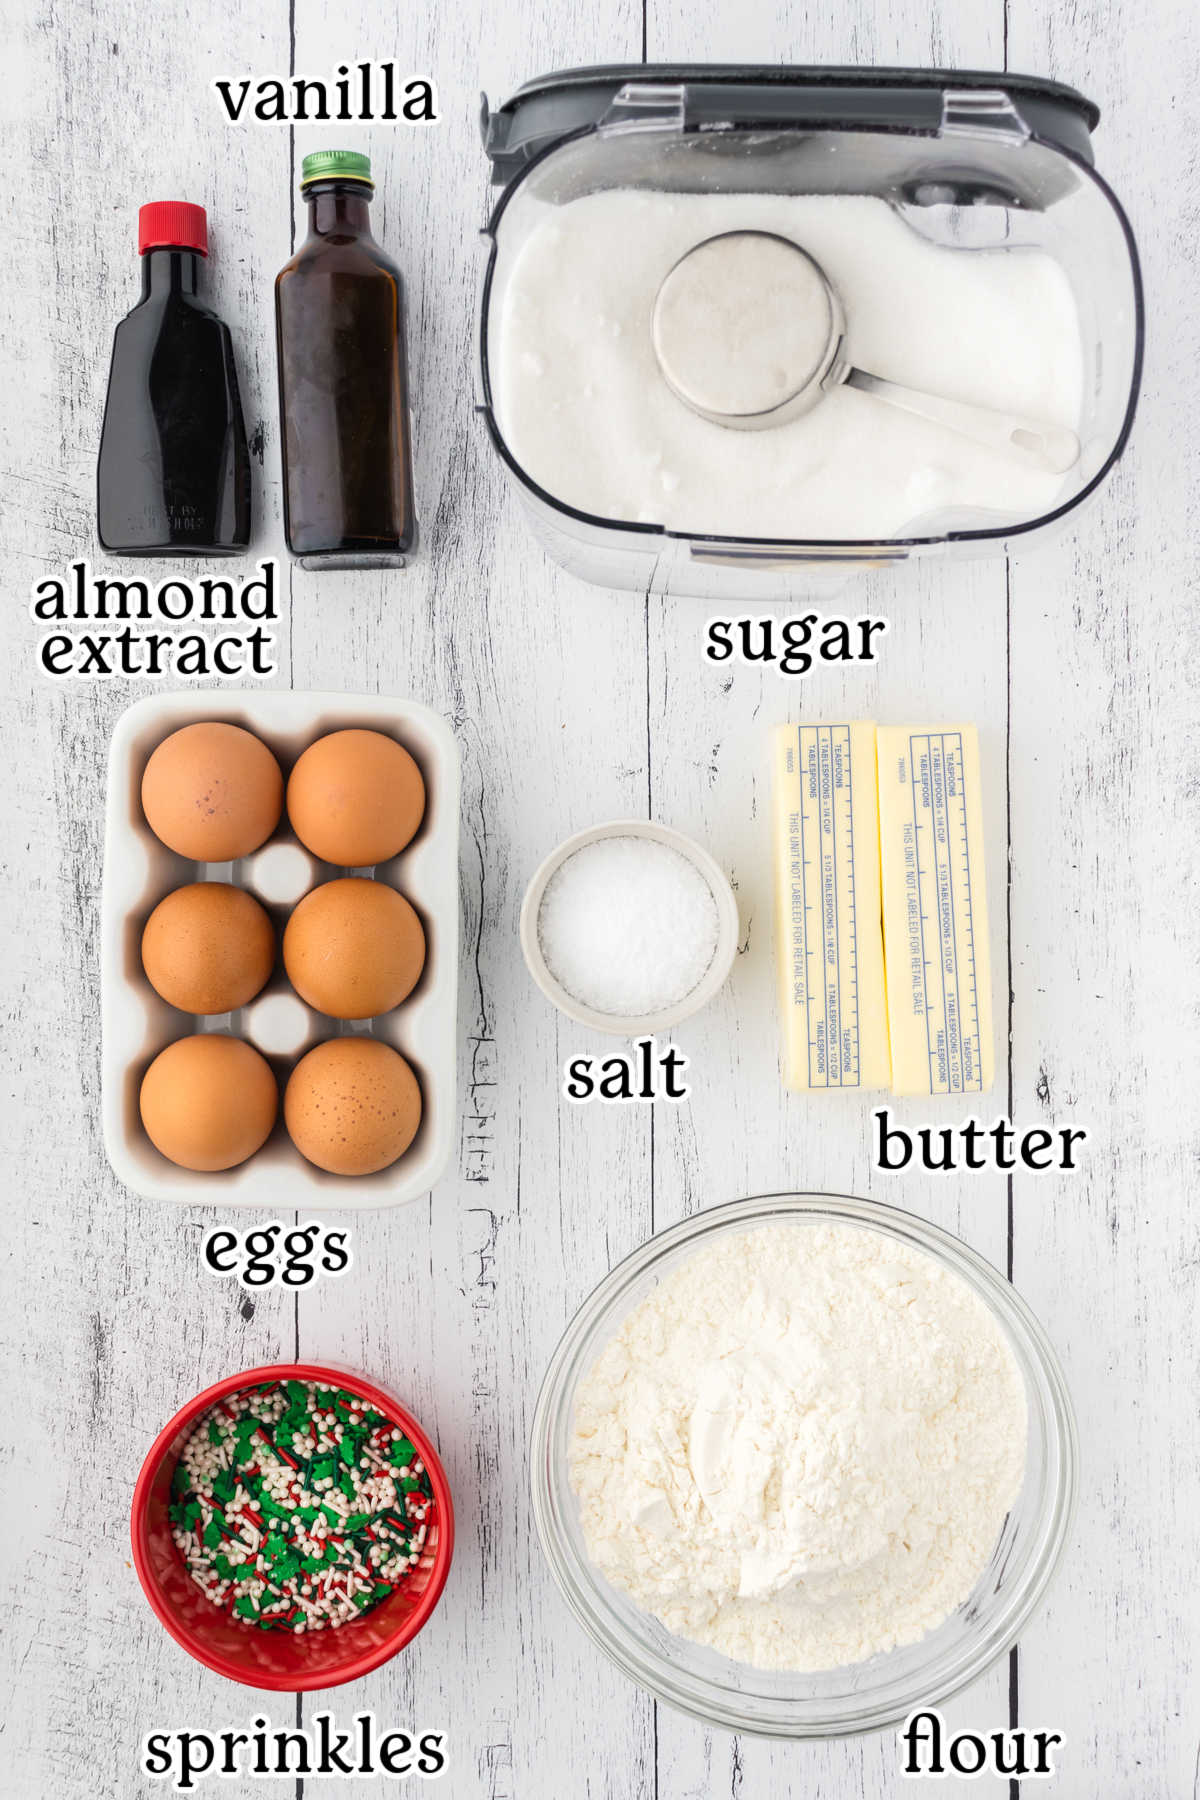 An overhead image with text overlay of the recipe ingredients.